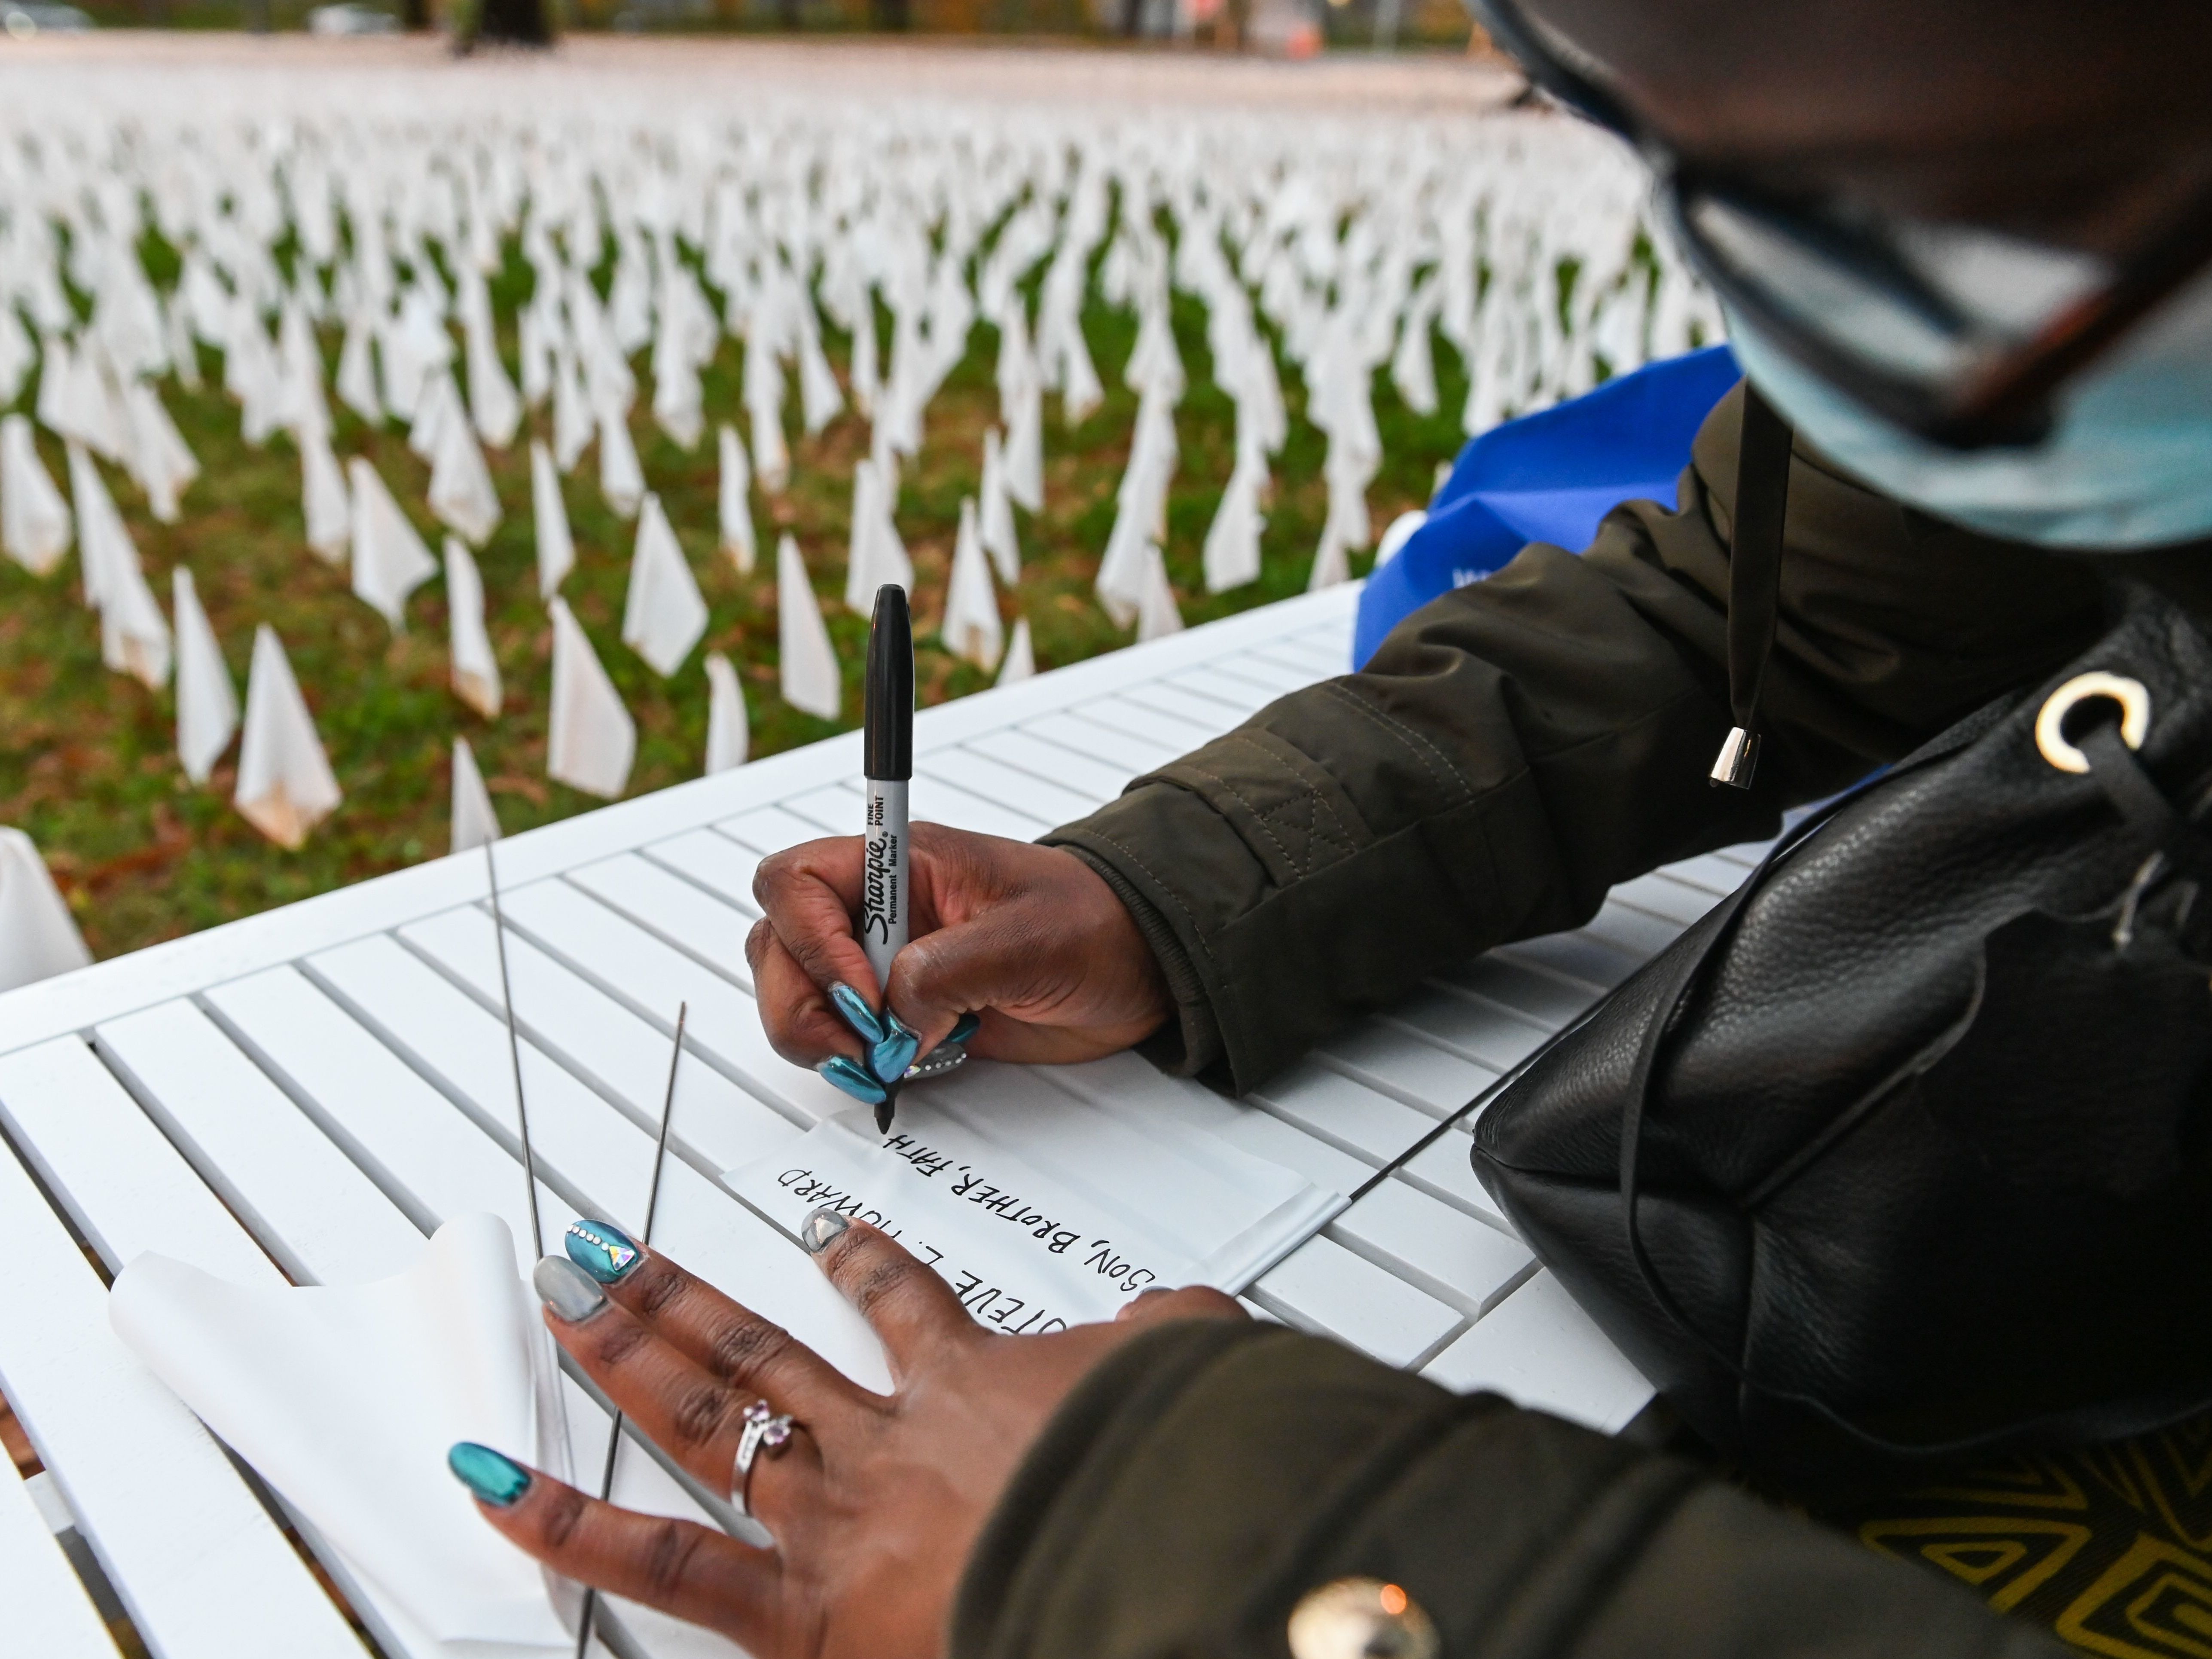 Patrice Howard writes on white flags before planting them to remember her recently deceased father and close friends in November at "IN AMERICA How Could This Happen...," a public art installation in Washington, D.C. Led by artist Suzanne Firstenberg, volunteers planted white flags in a field to symbolize each life lost to COVID-19 in the U.S. CREDIT: Roberto Schmidt/AFP via Getty Images